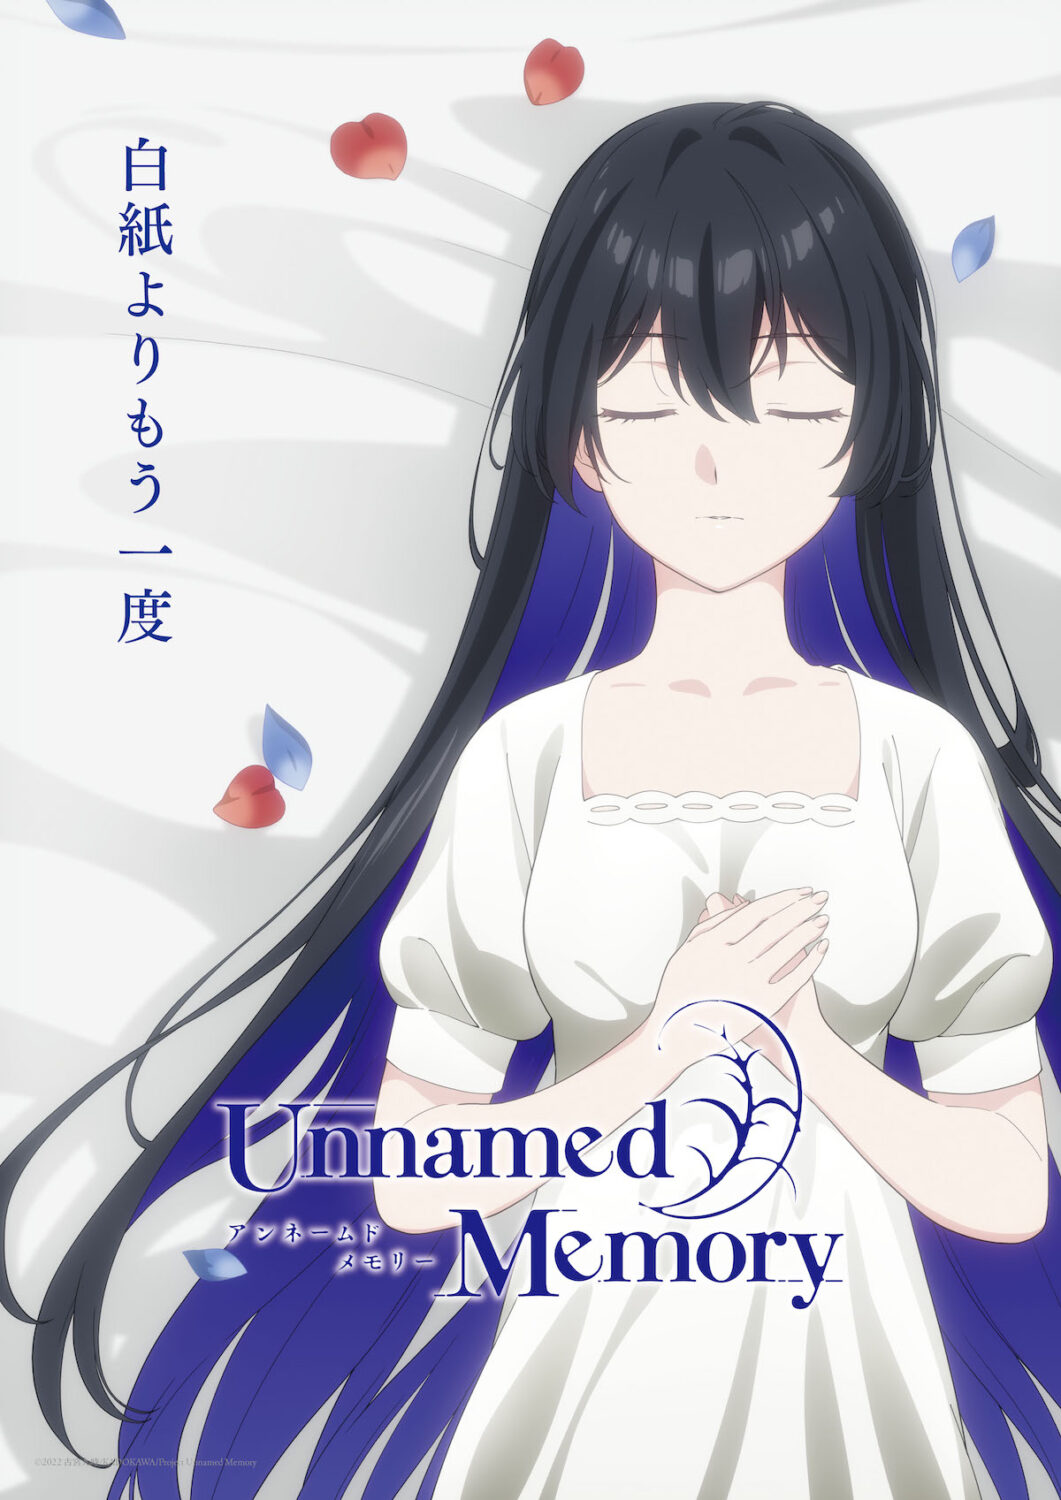 Unnamed Memory Act 2 anime